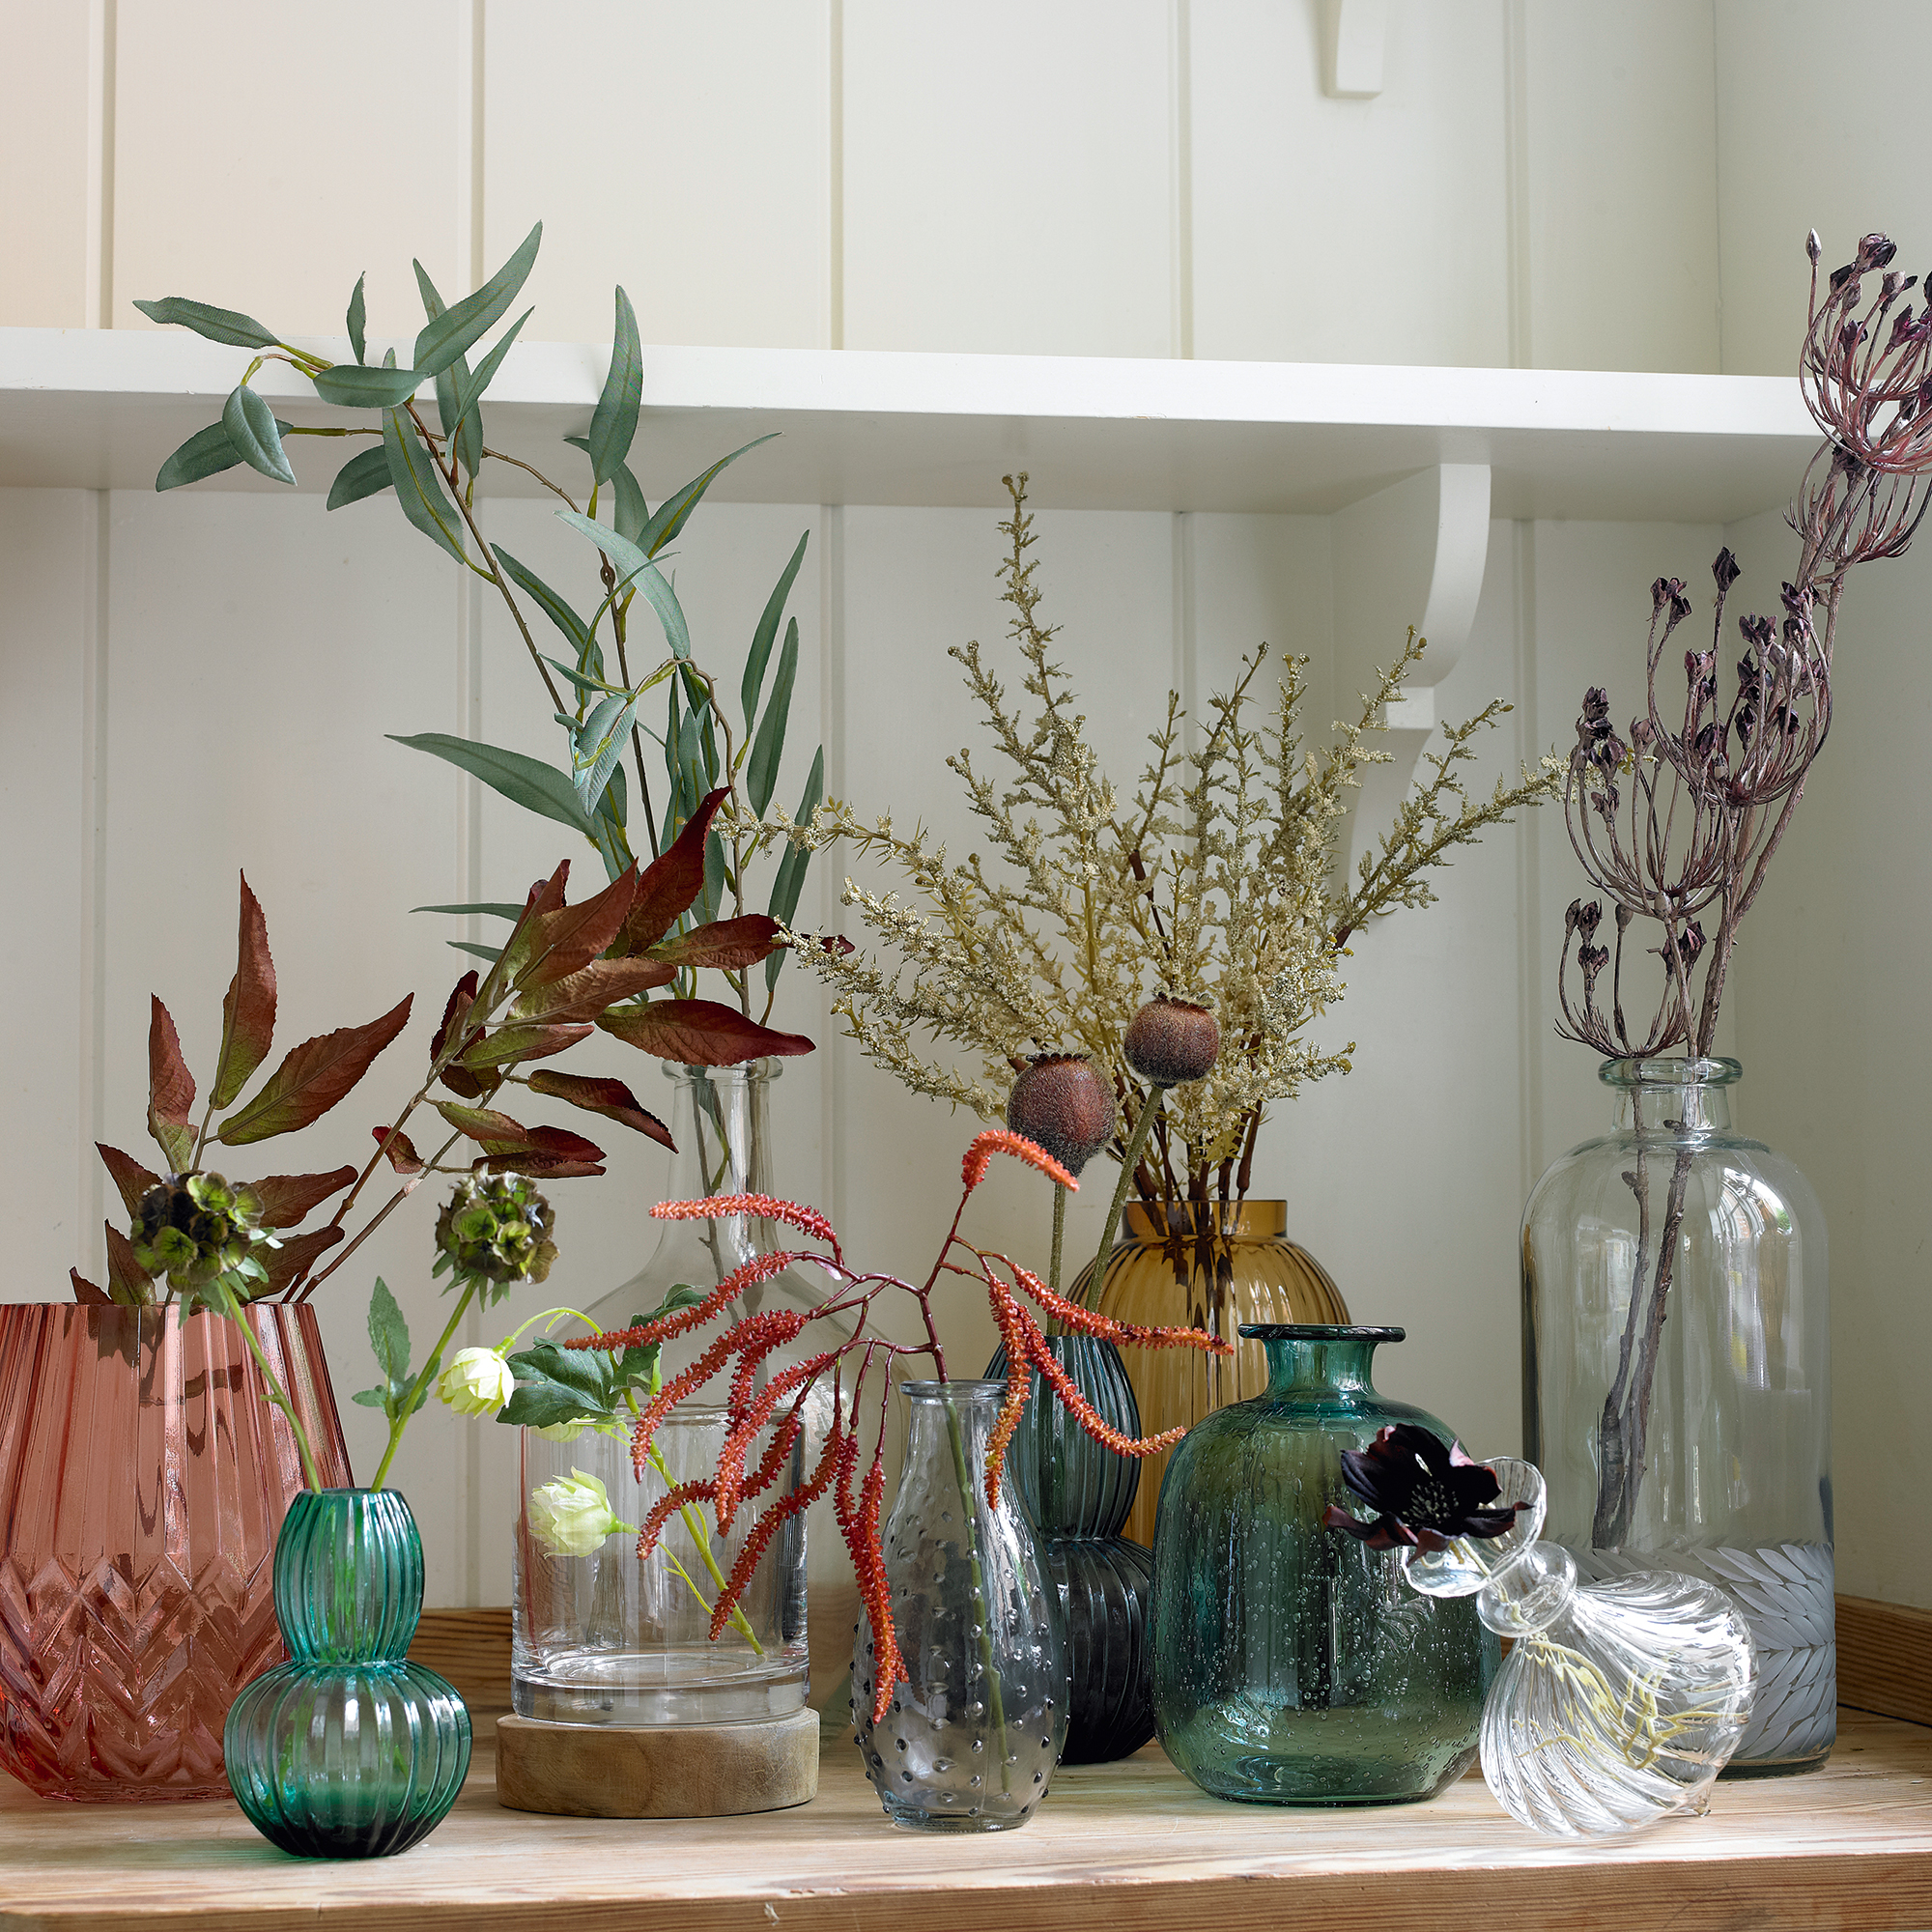 Collection of glass vases filled with foliage